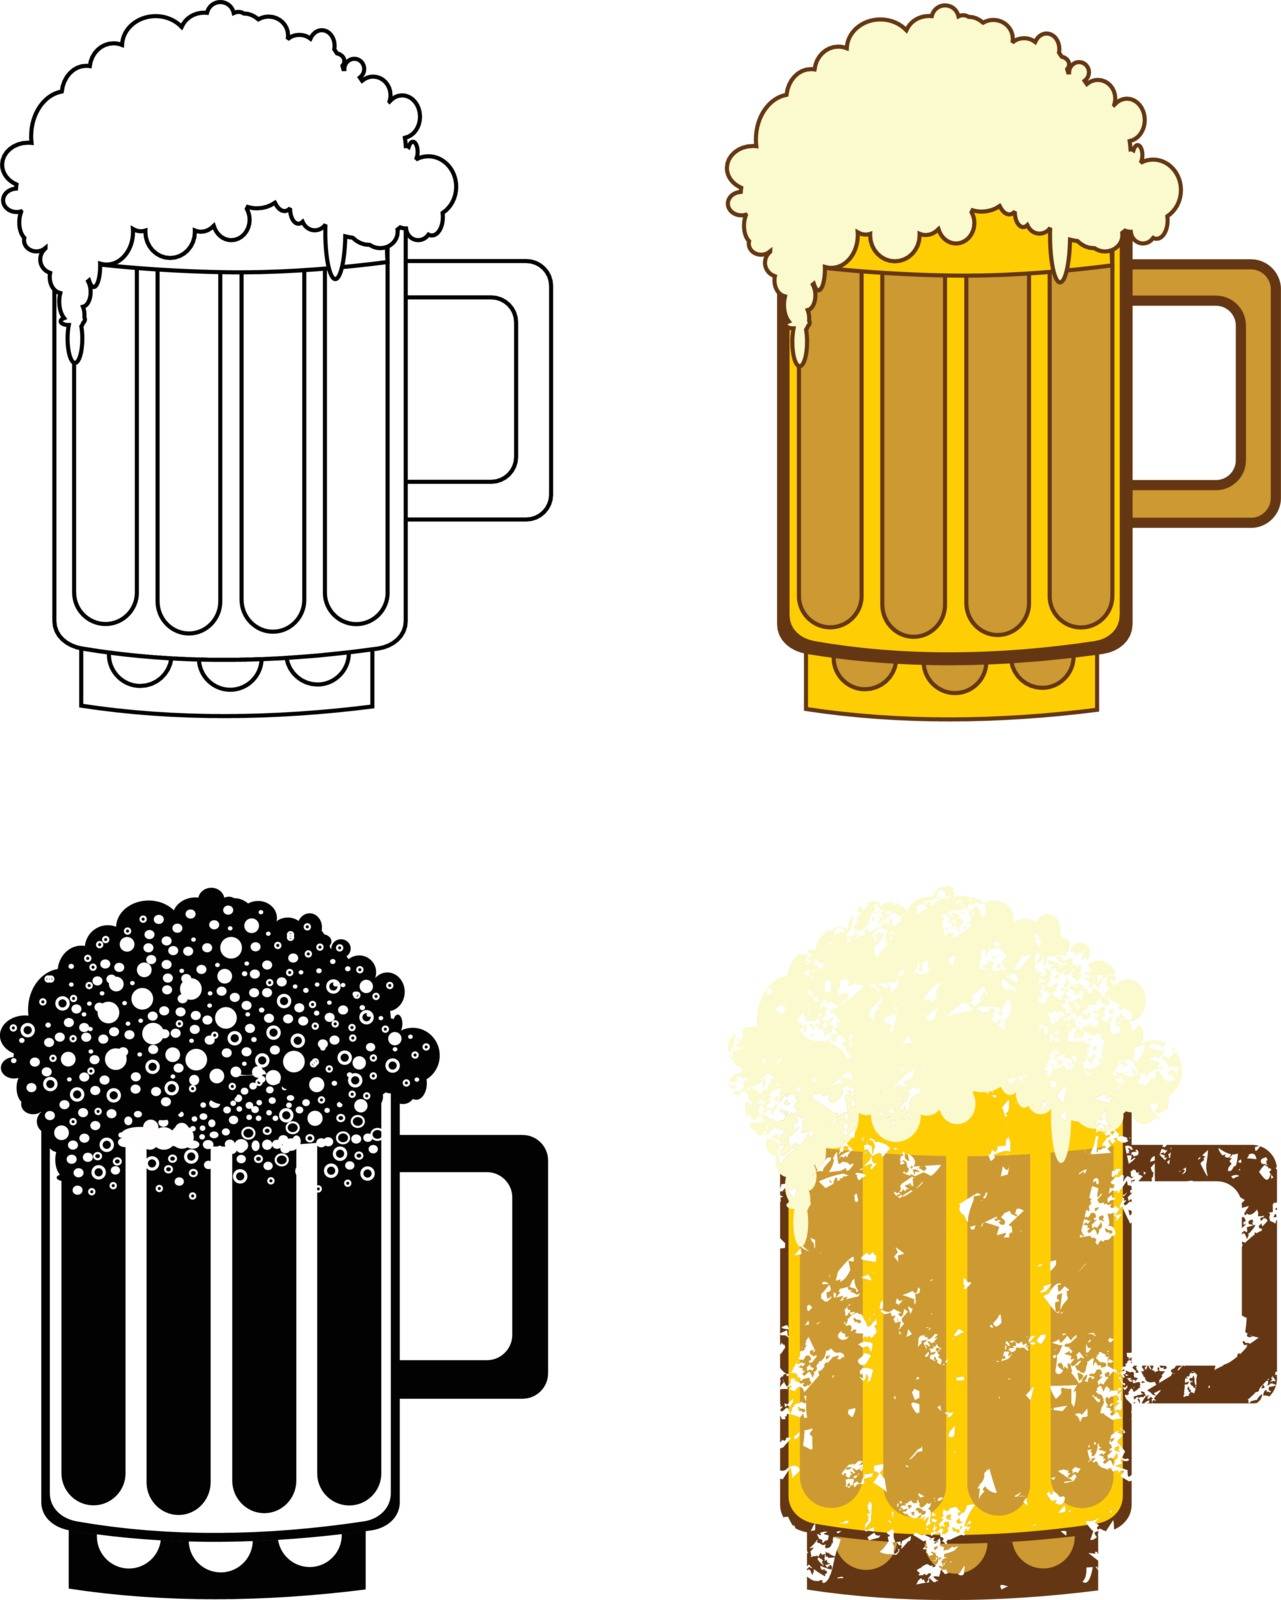 beer mug set isolated on a white background vector eps 10